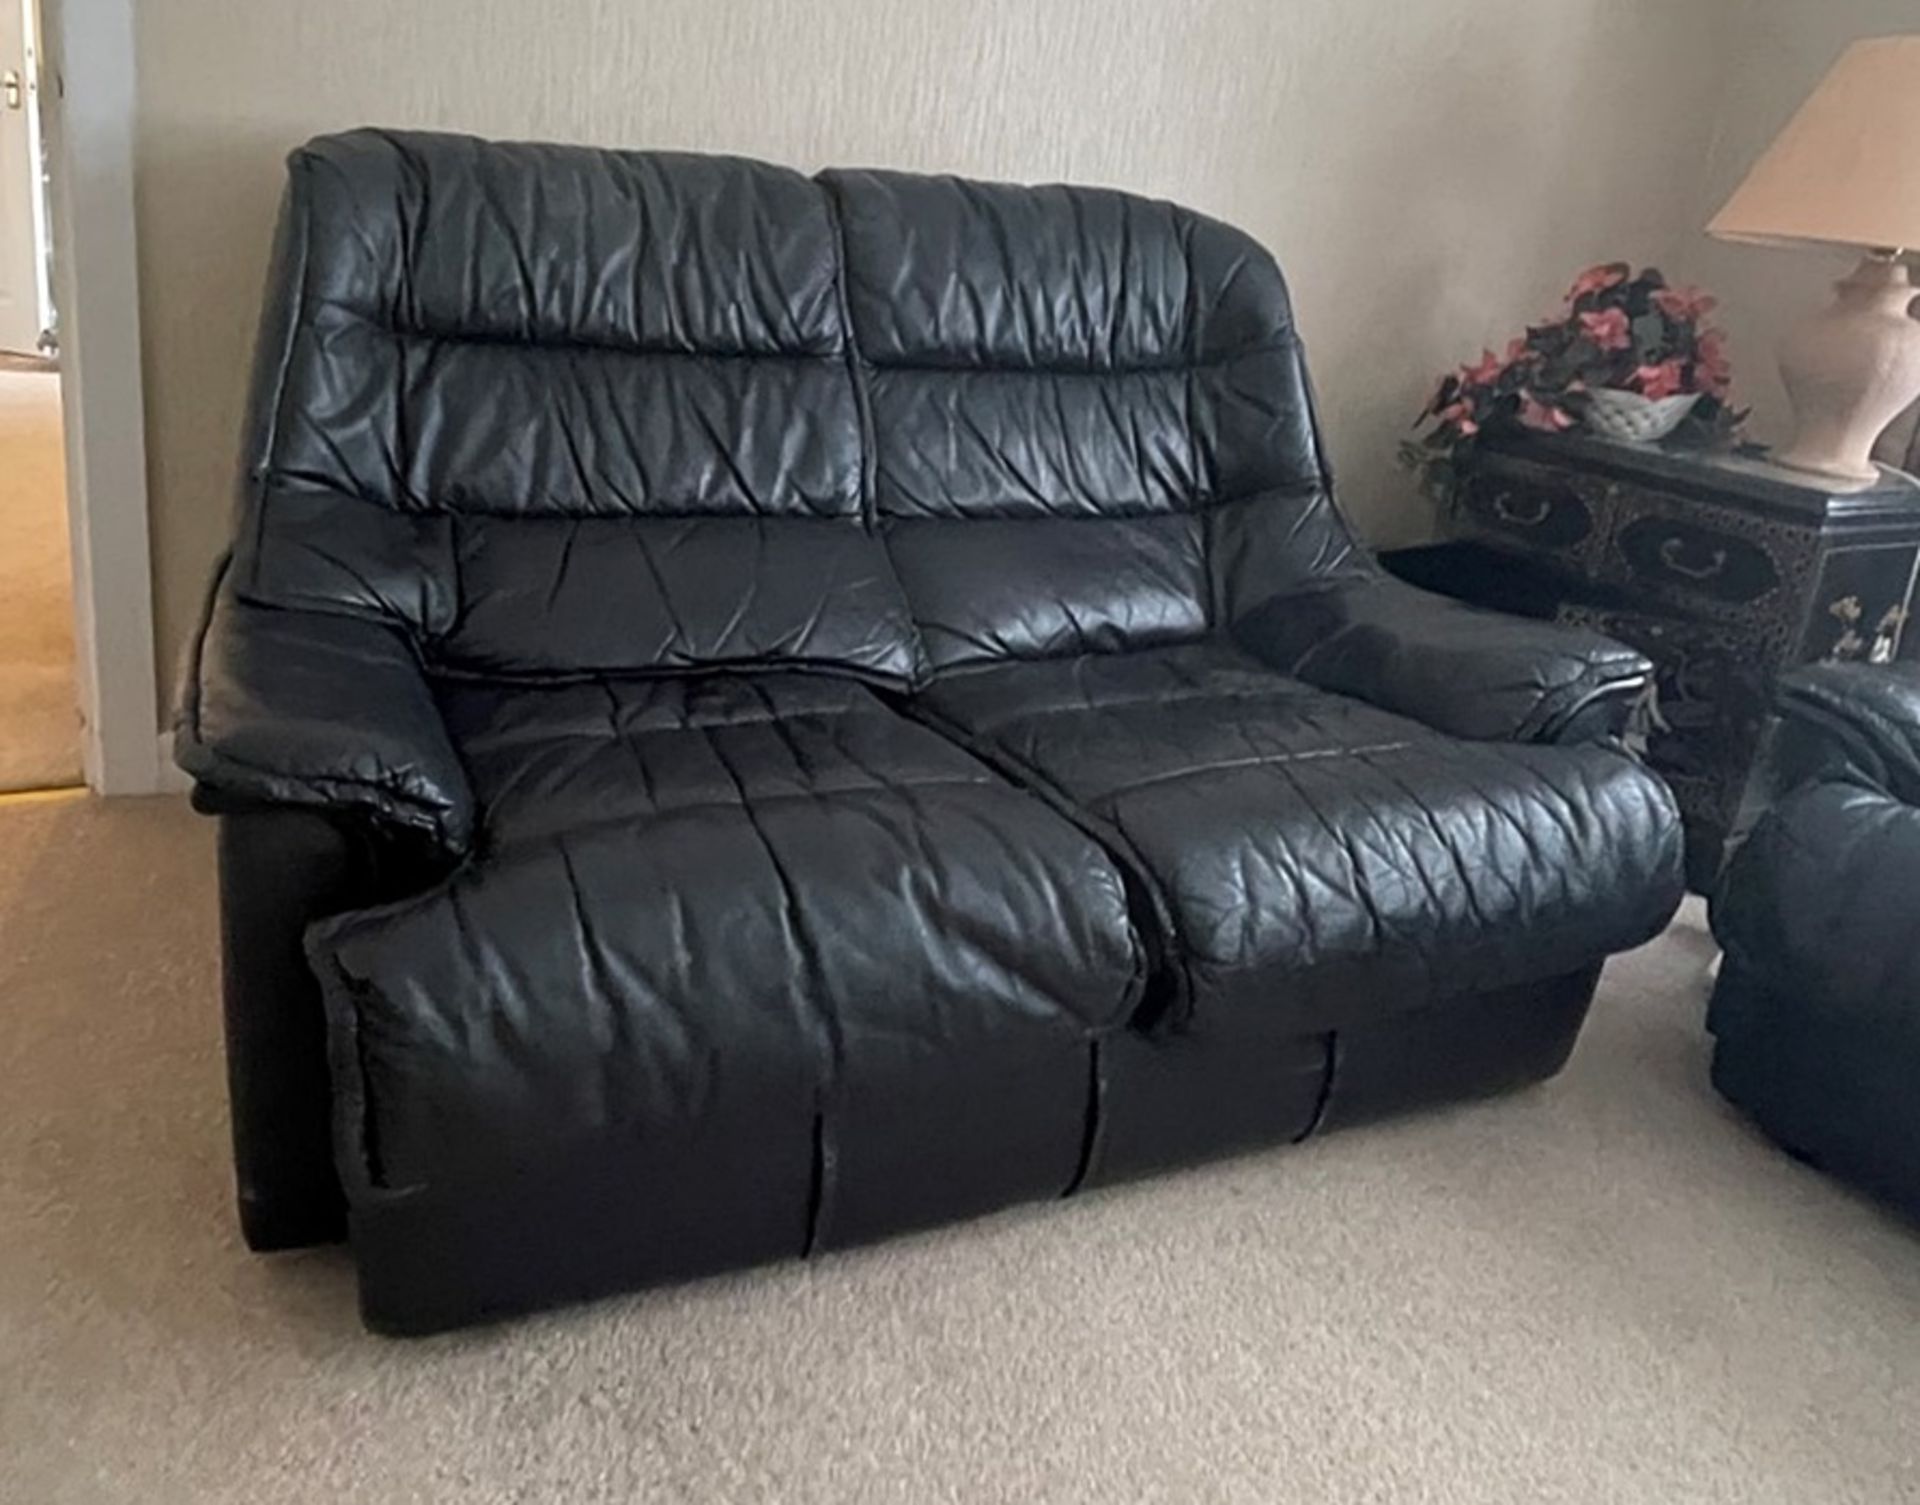 3-Piece Sofa Set In Black - Includes 1 x 3-Seater Sofa, 1 x 2-Seater Sofa & 1 x Footstool - From - Image 4 of 11